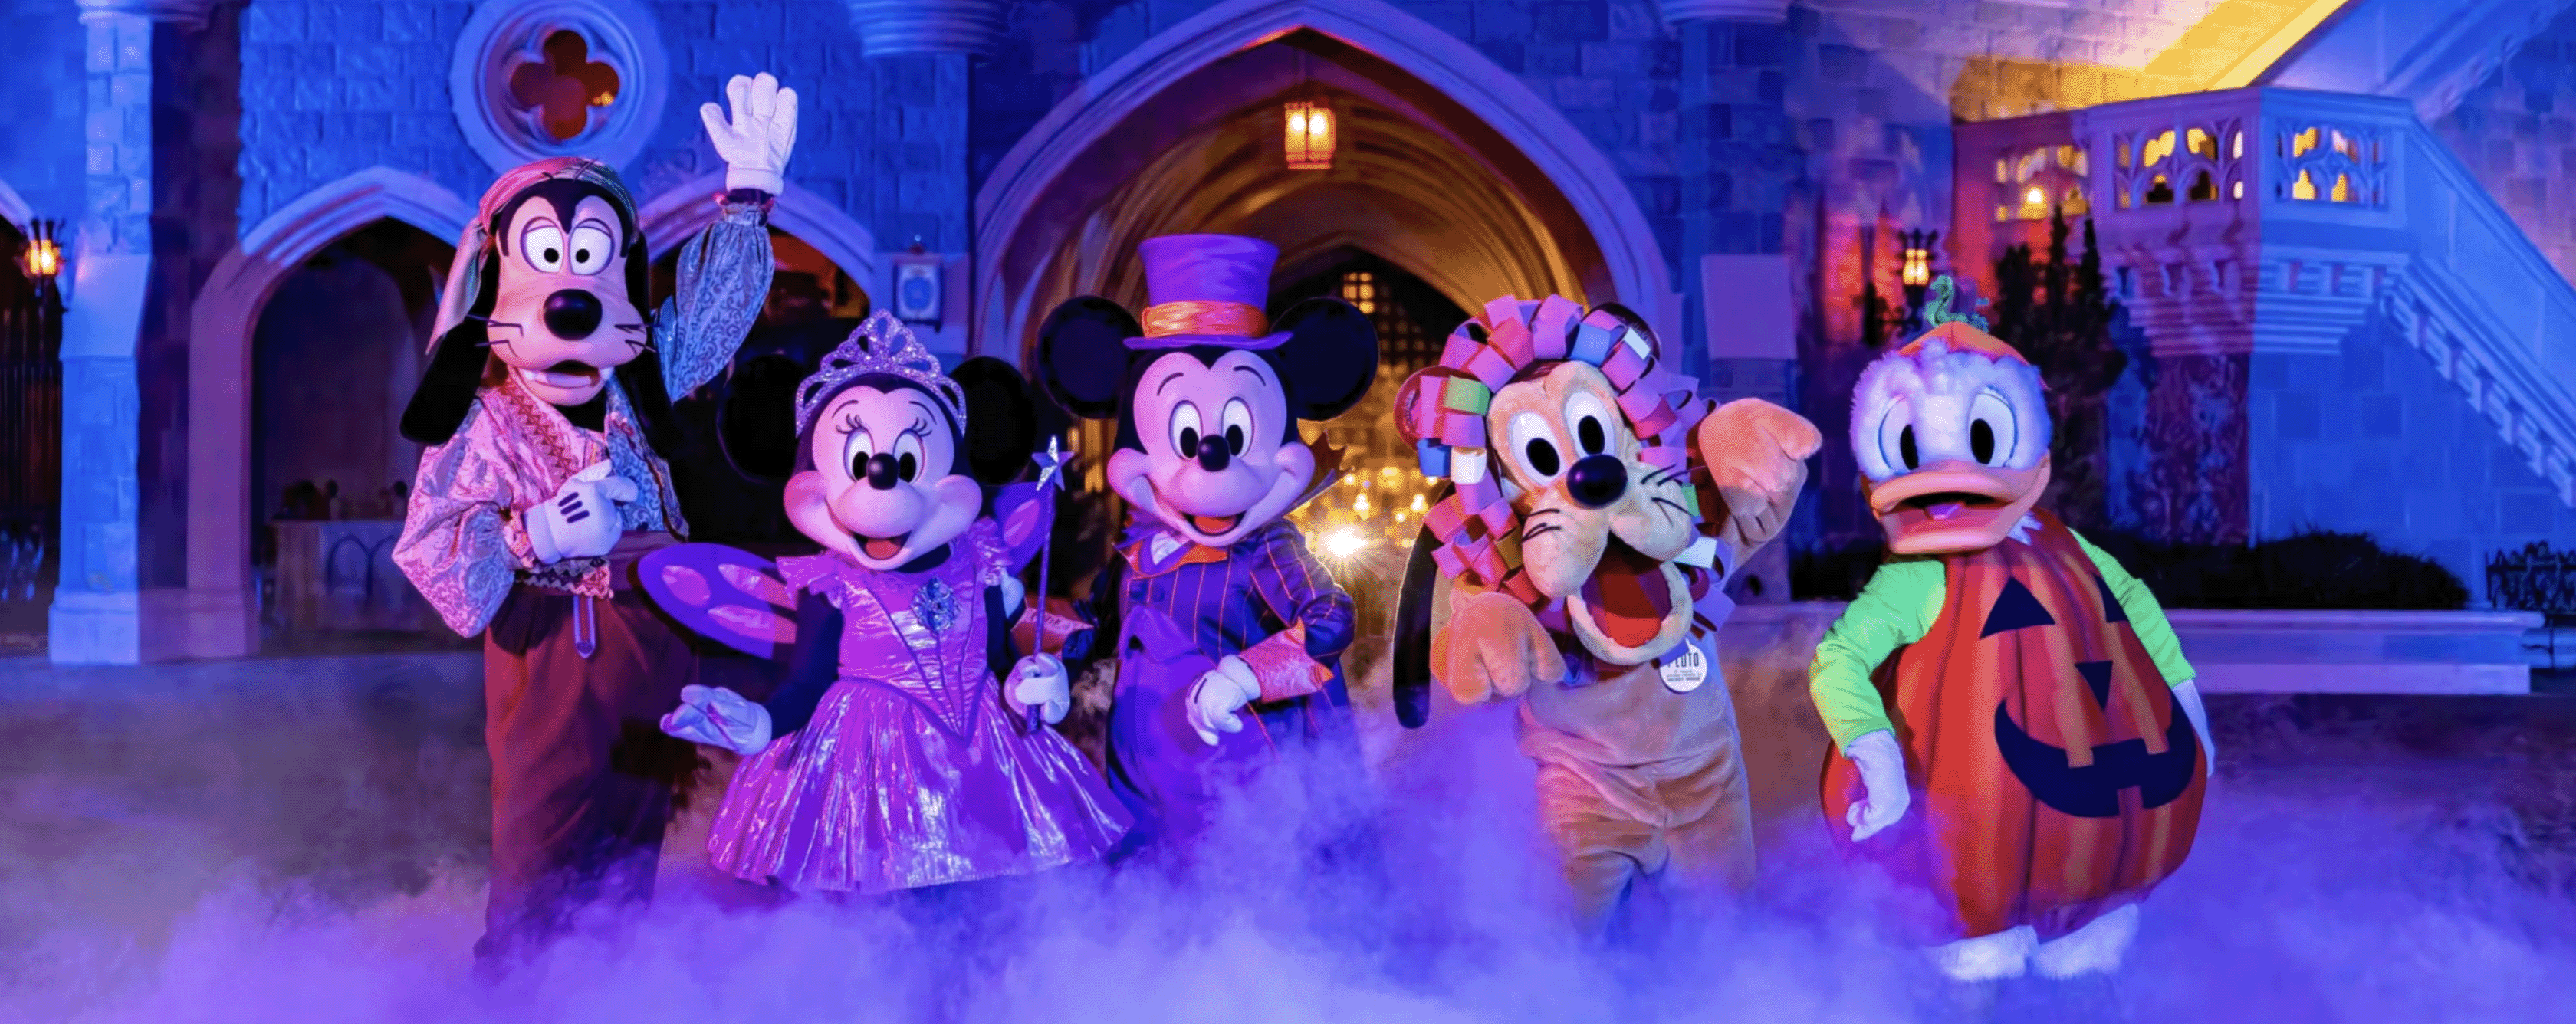 mickey mouse and friends in halloween costumes